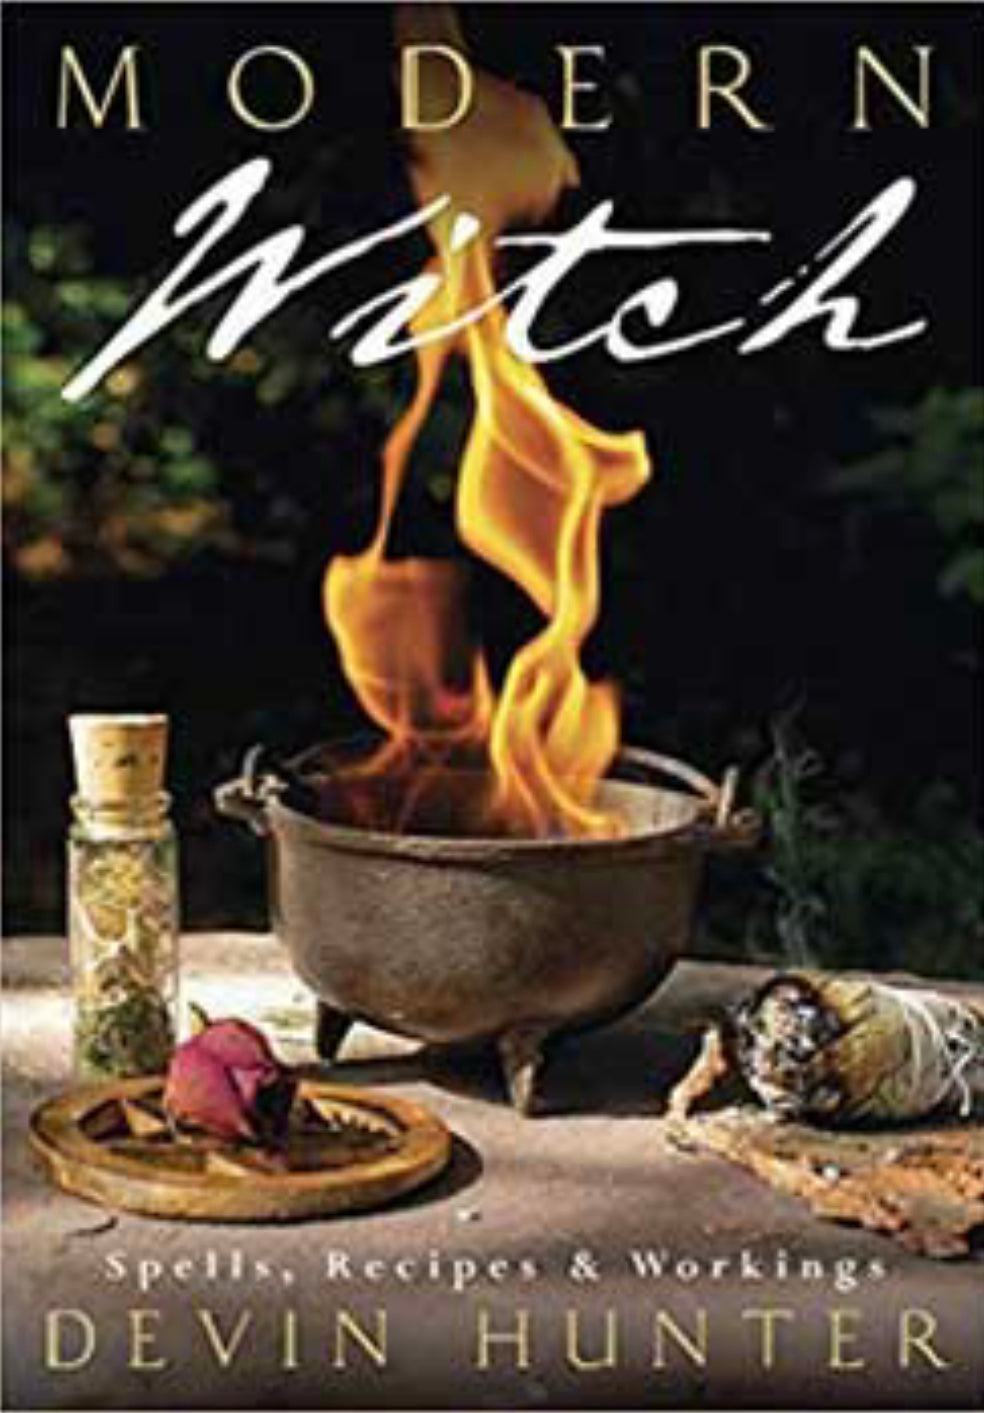 Modern Witch Spells, Recipes, & Workings